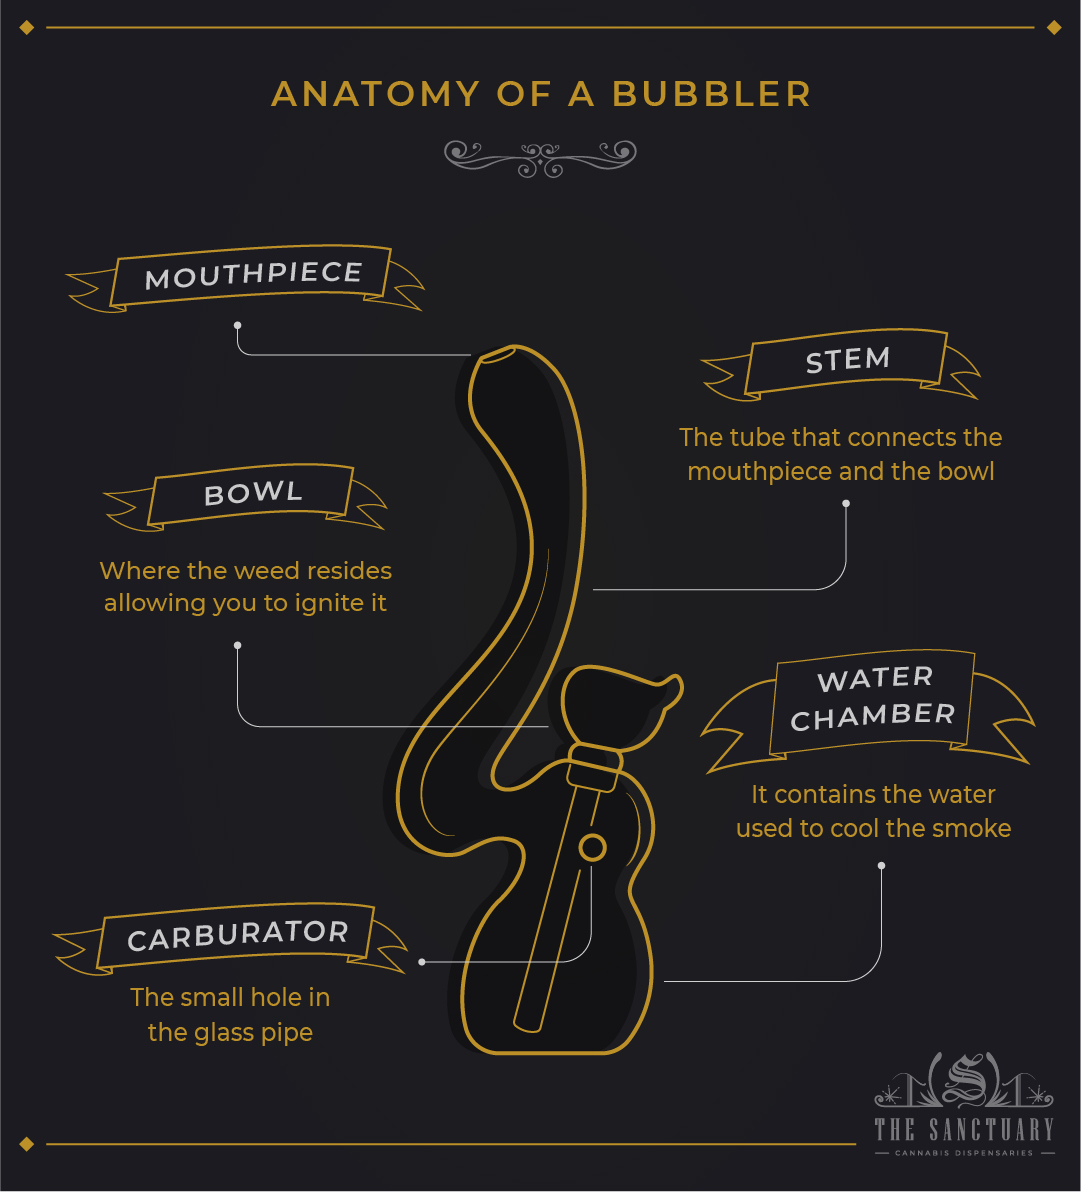 How to Use a Bubbler